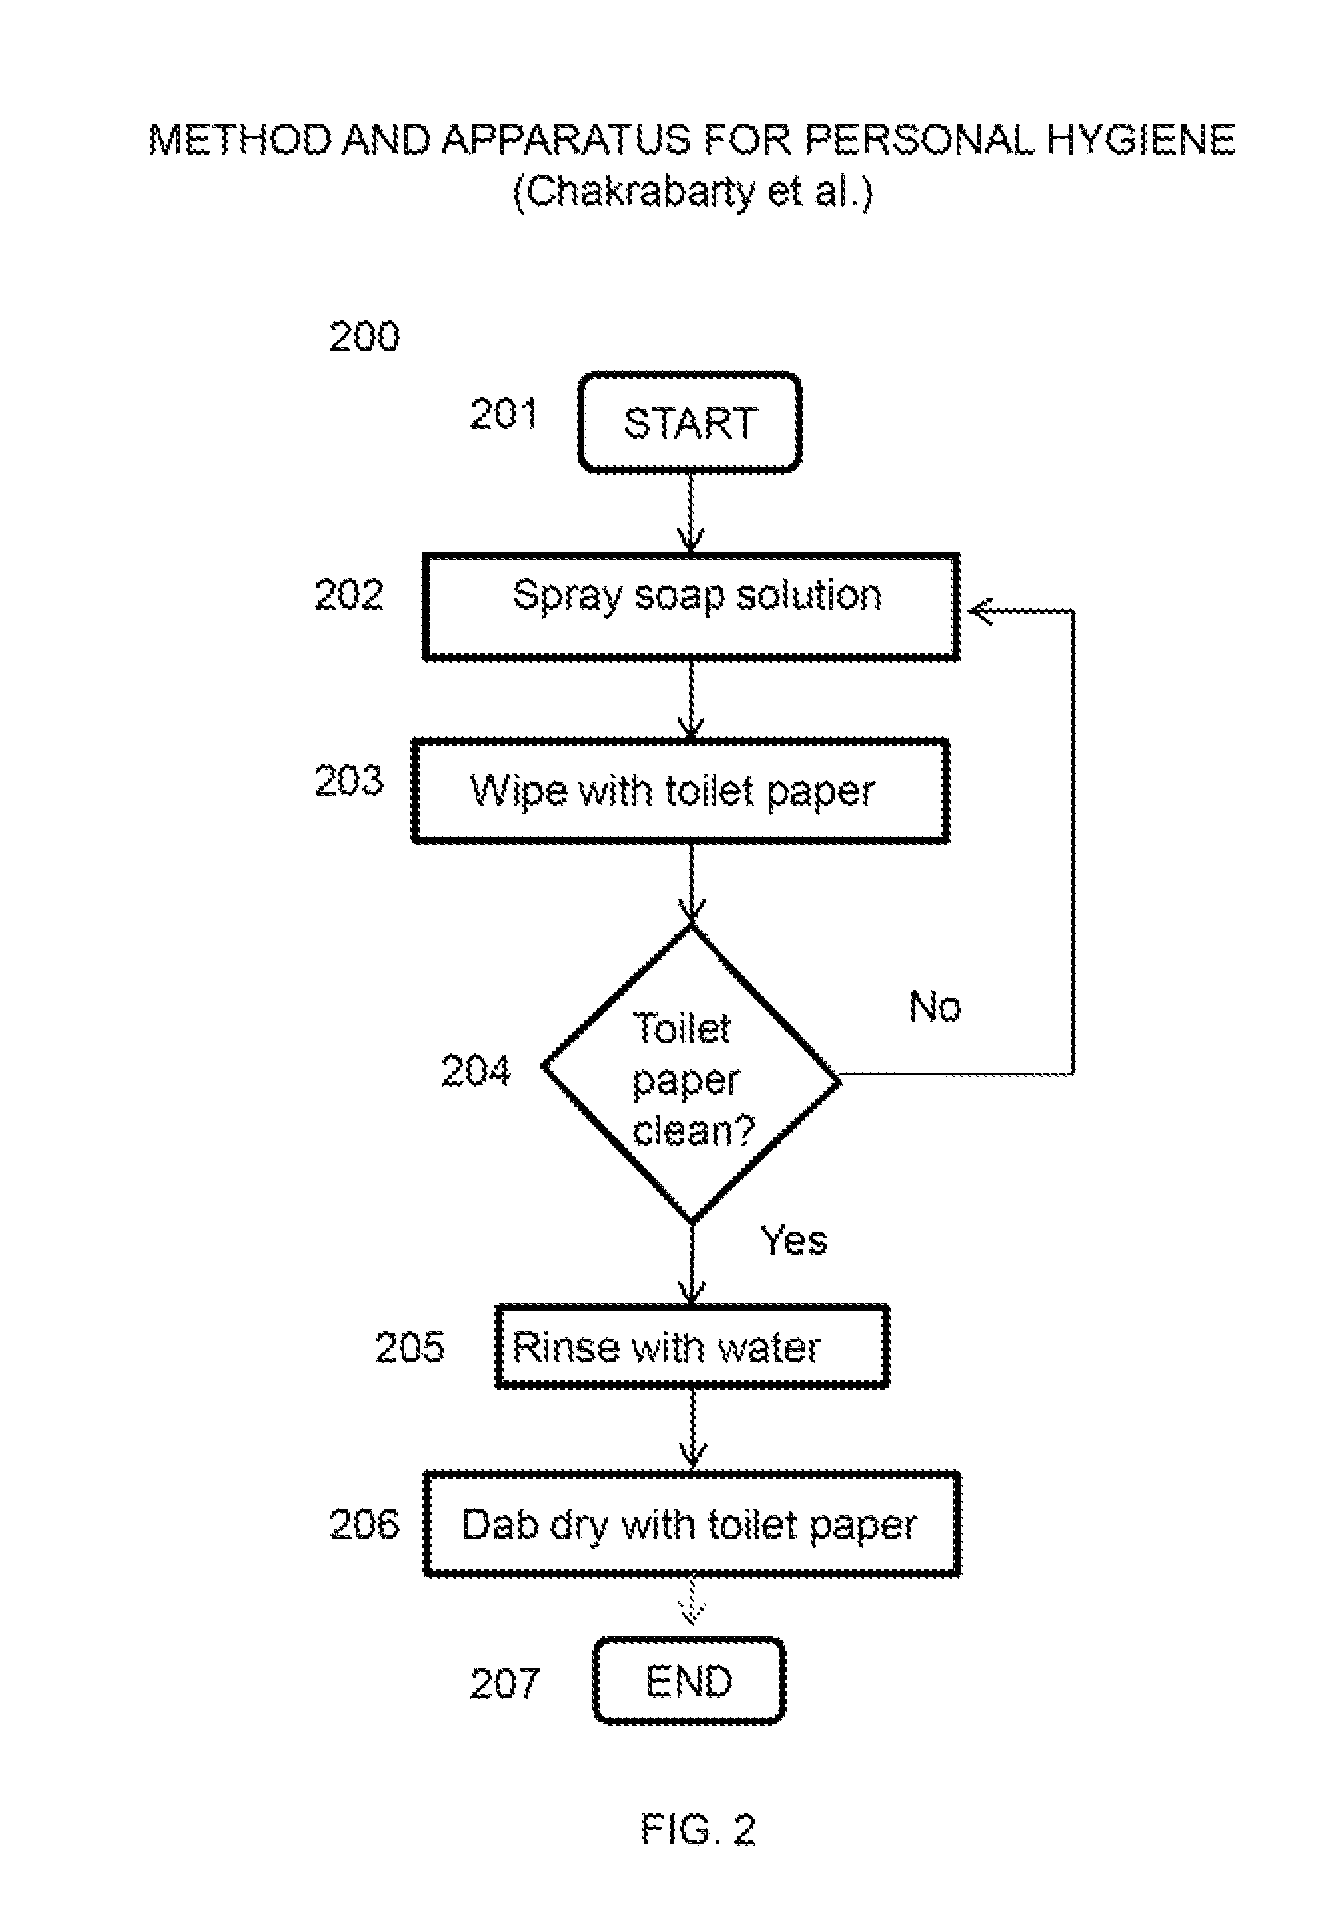 Method and apparatus for personal hygiene